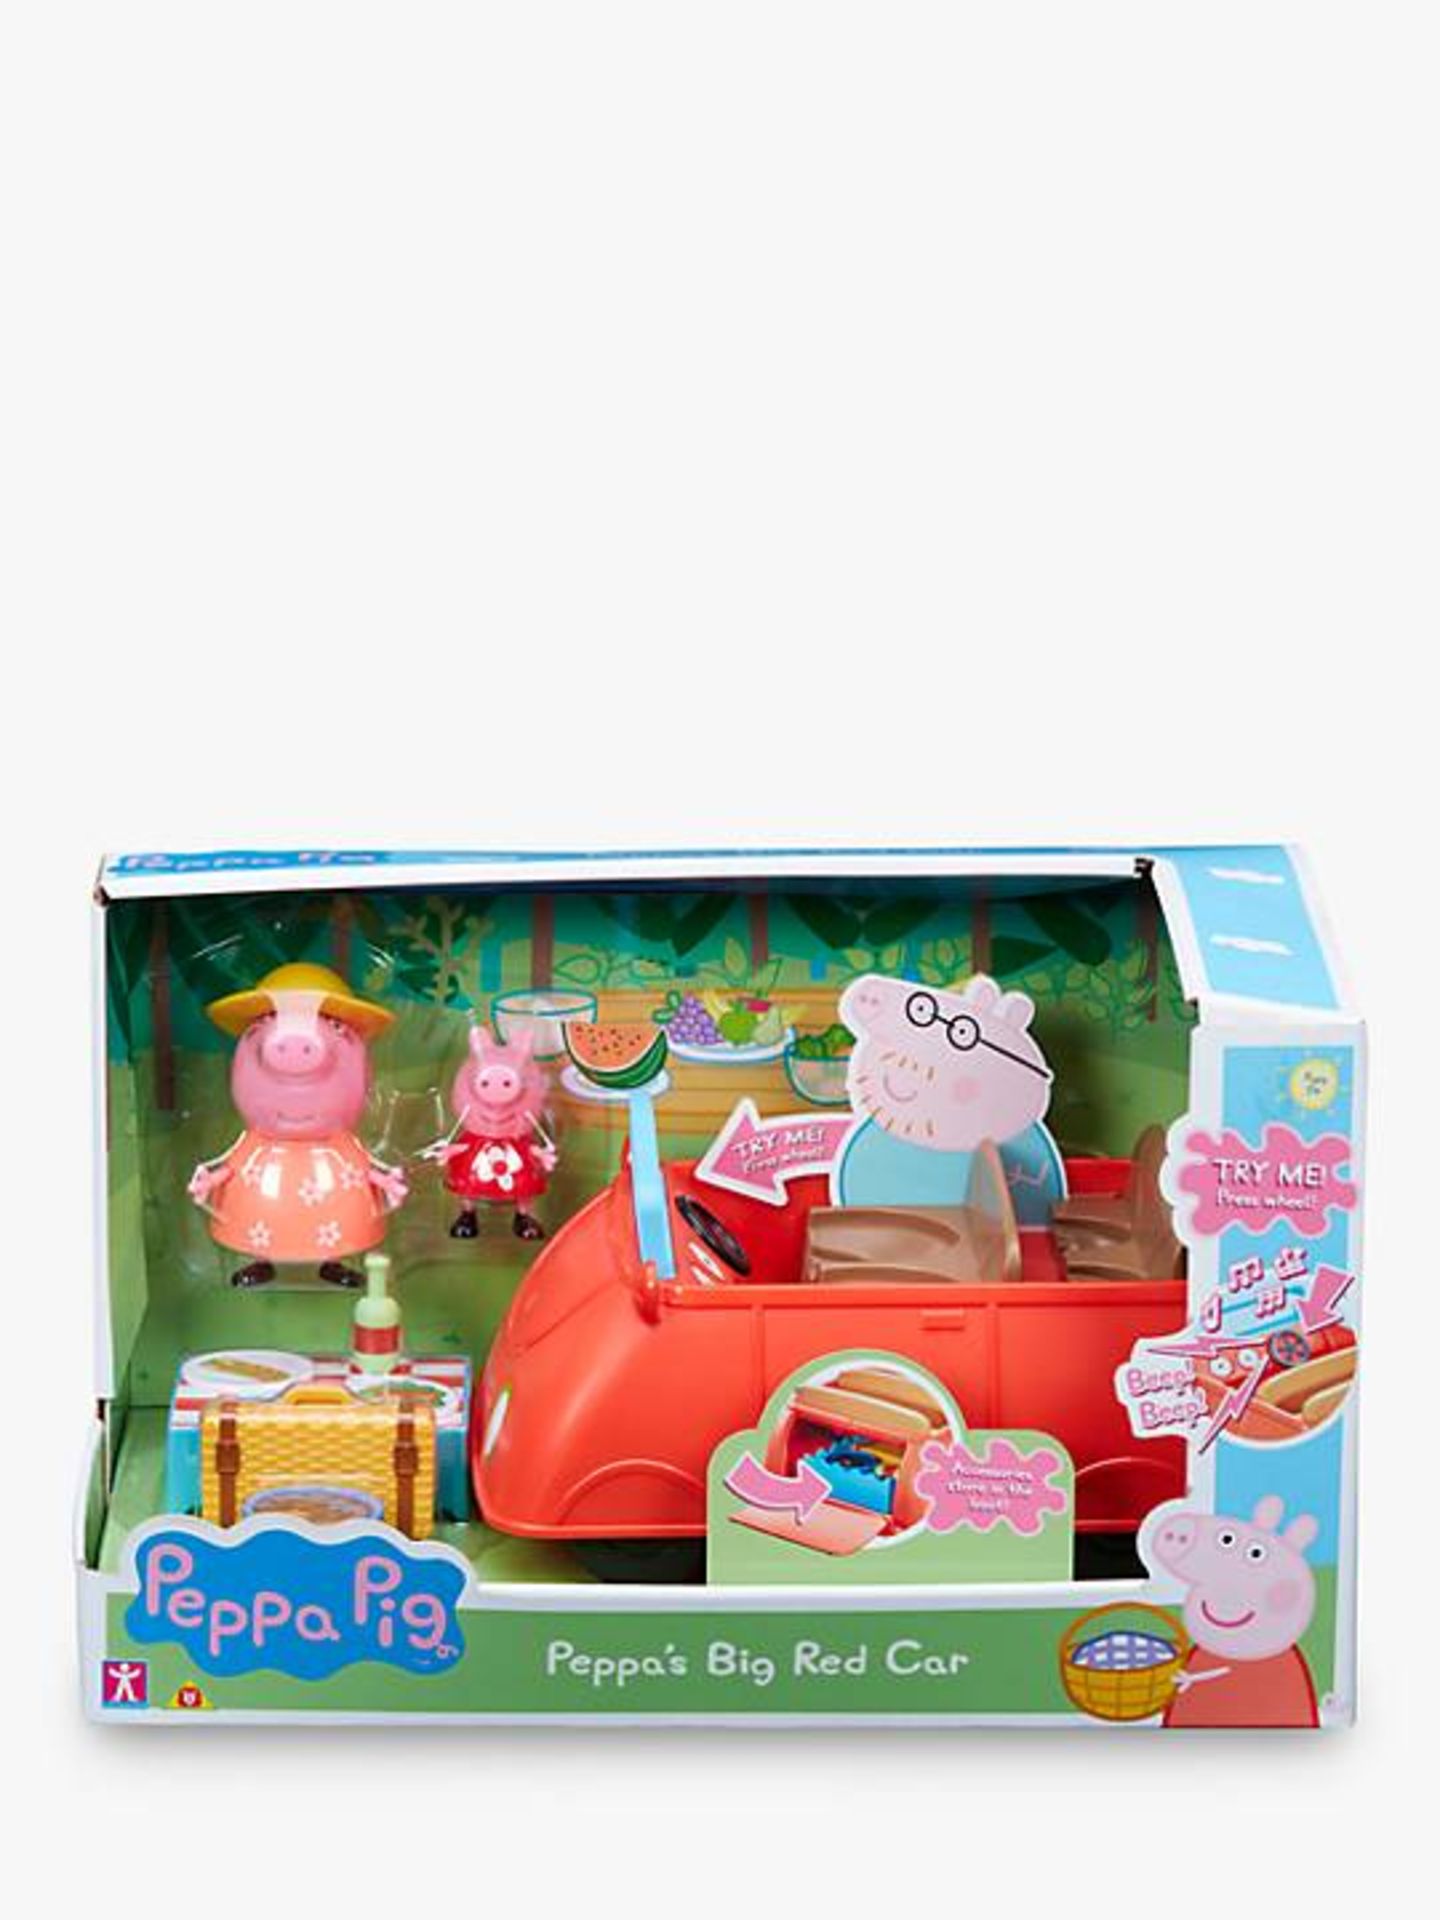 Pallet of Raw Customer Returns - Category - STANDARD TOYS - P100067636 - Image 34 of 42